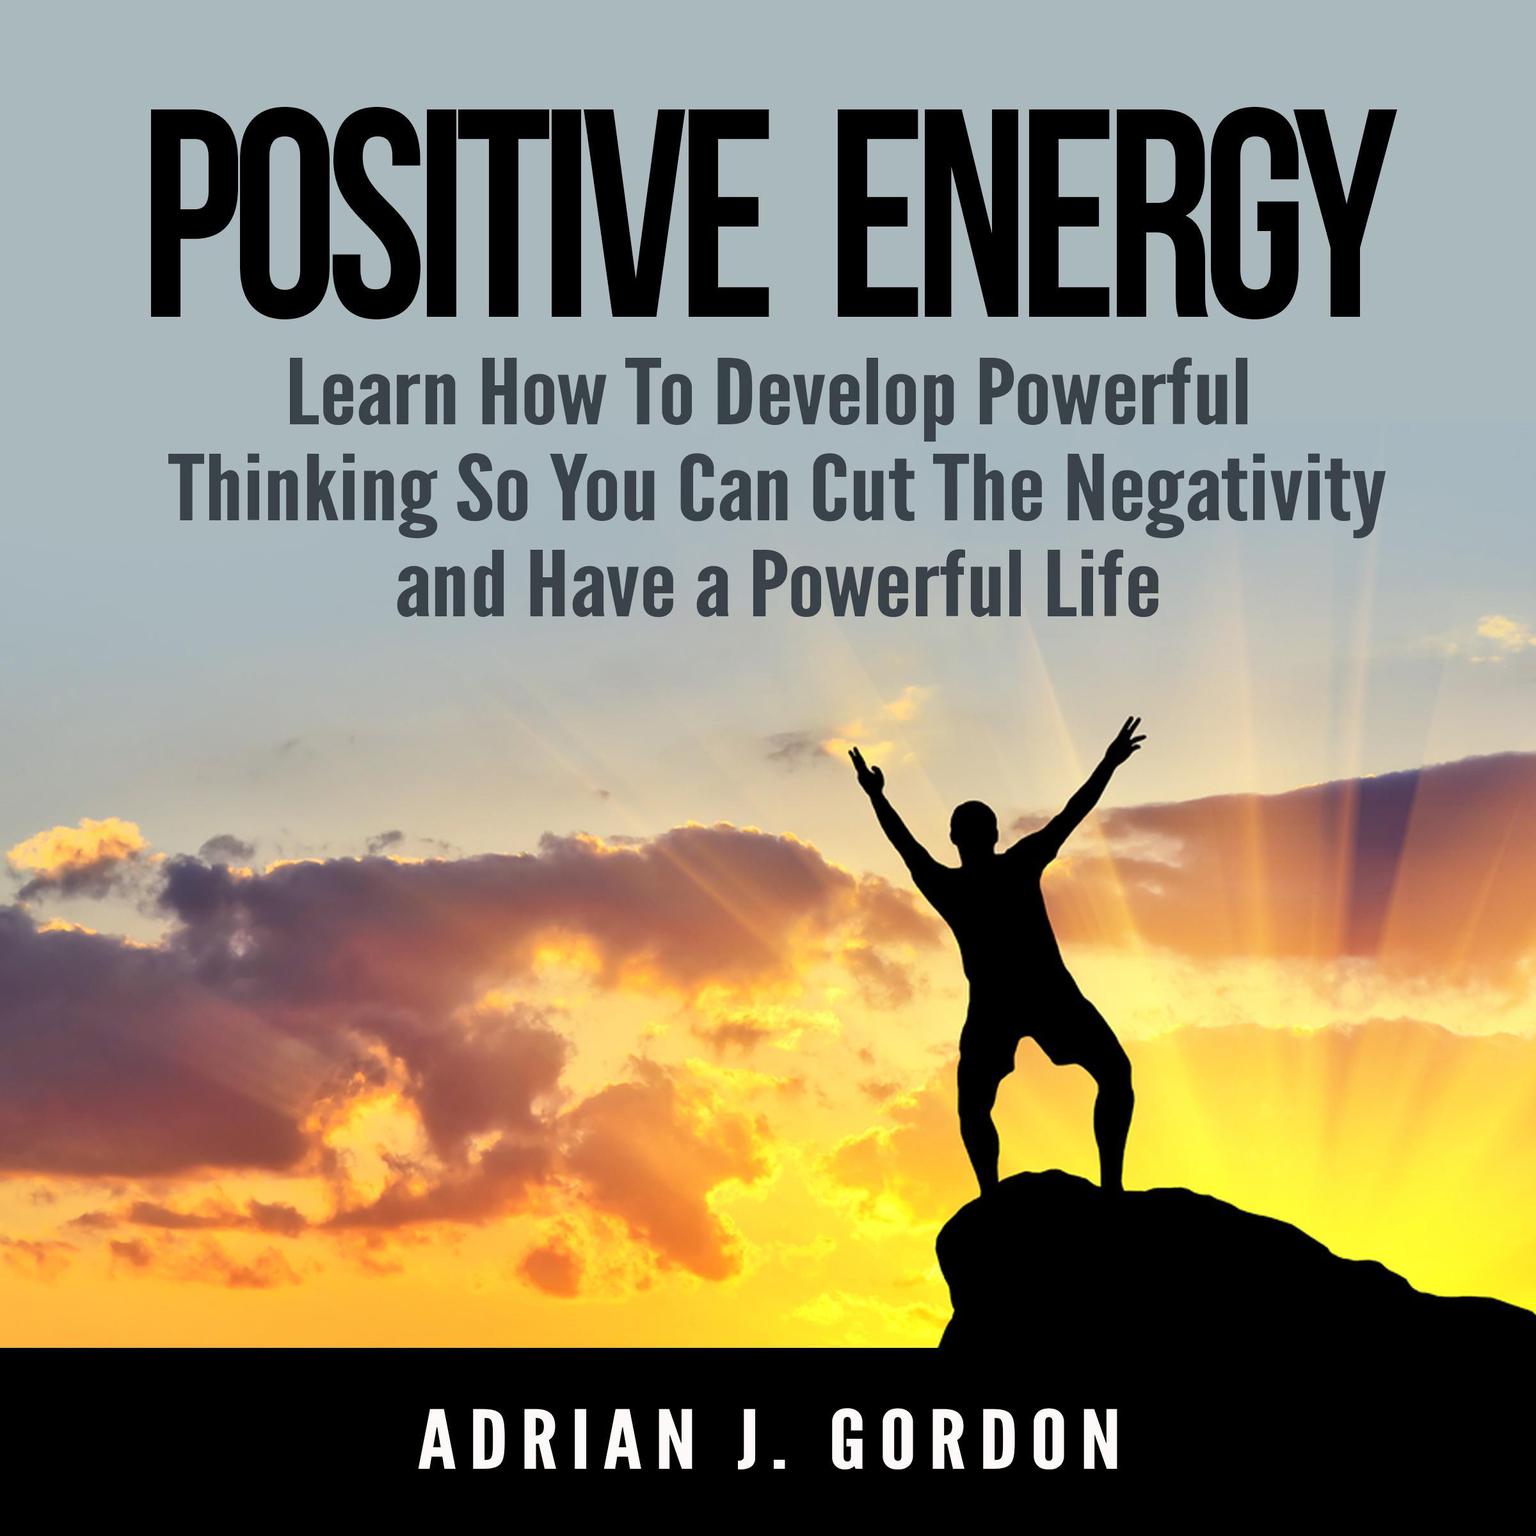 Positive Energy: Learn How To Develop Powerful Thinking So You Can Cut The Negativity and Have a Powerful Life Audiobook, by Adrian J. Gordon